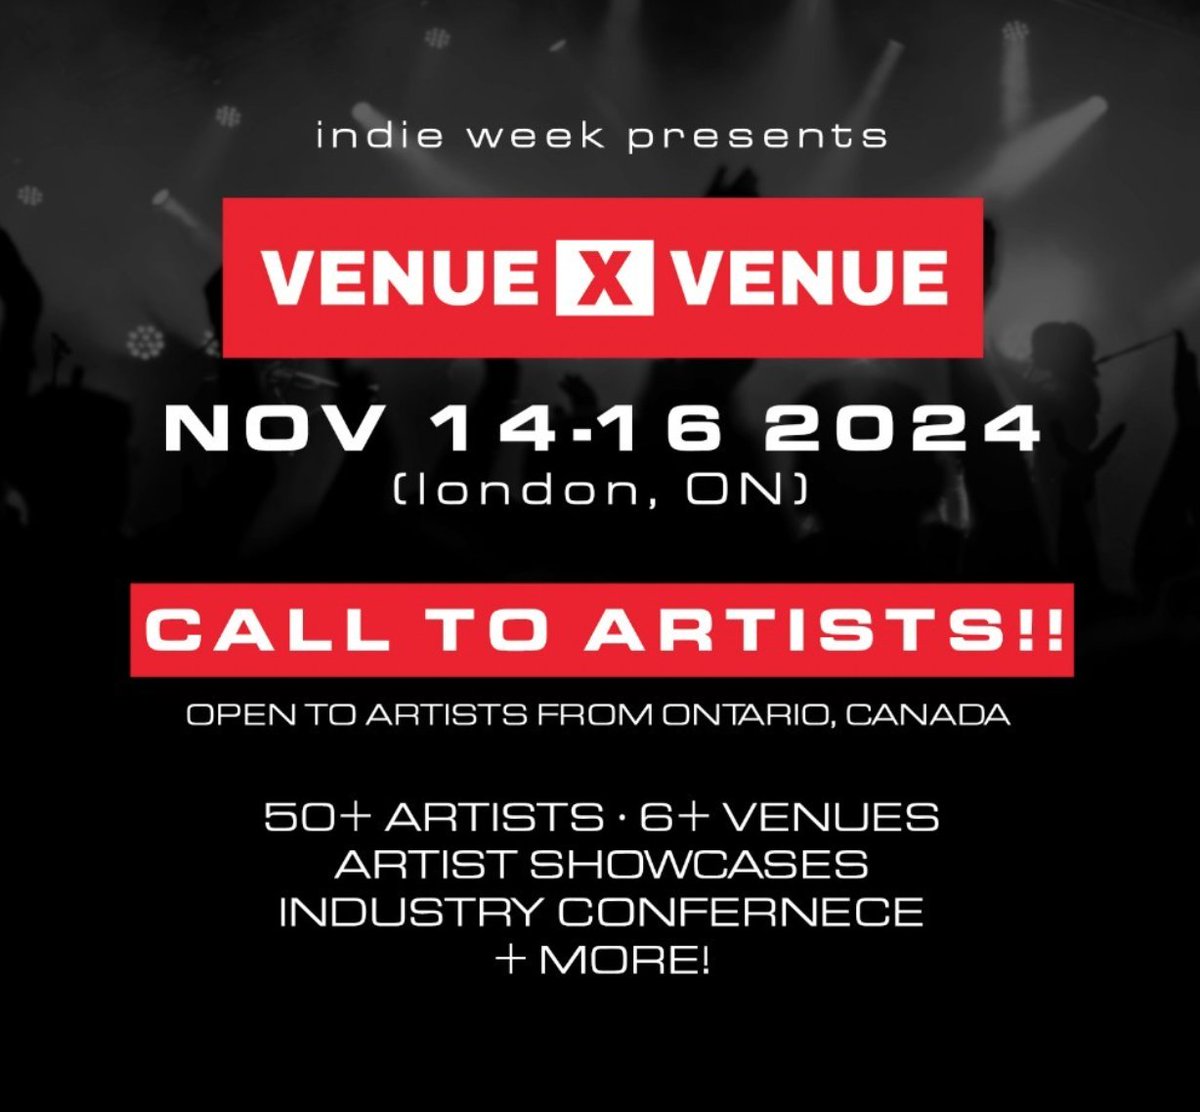 2 Weeks LEFT! Make sure to APPLY for your chance to perform at the second annual VENUExVENUE, and be a part of a COMMUNITY! (new deadline: TUES MAY 28) APPLY NOW LINK IN BIO venuexvenue.com #artist #songwriter #london #ontario